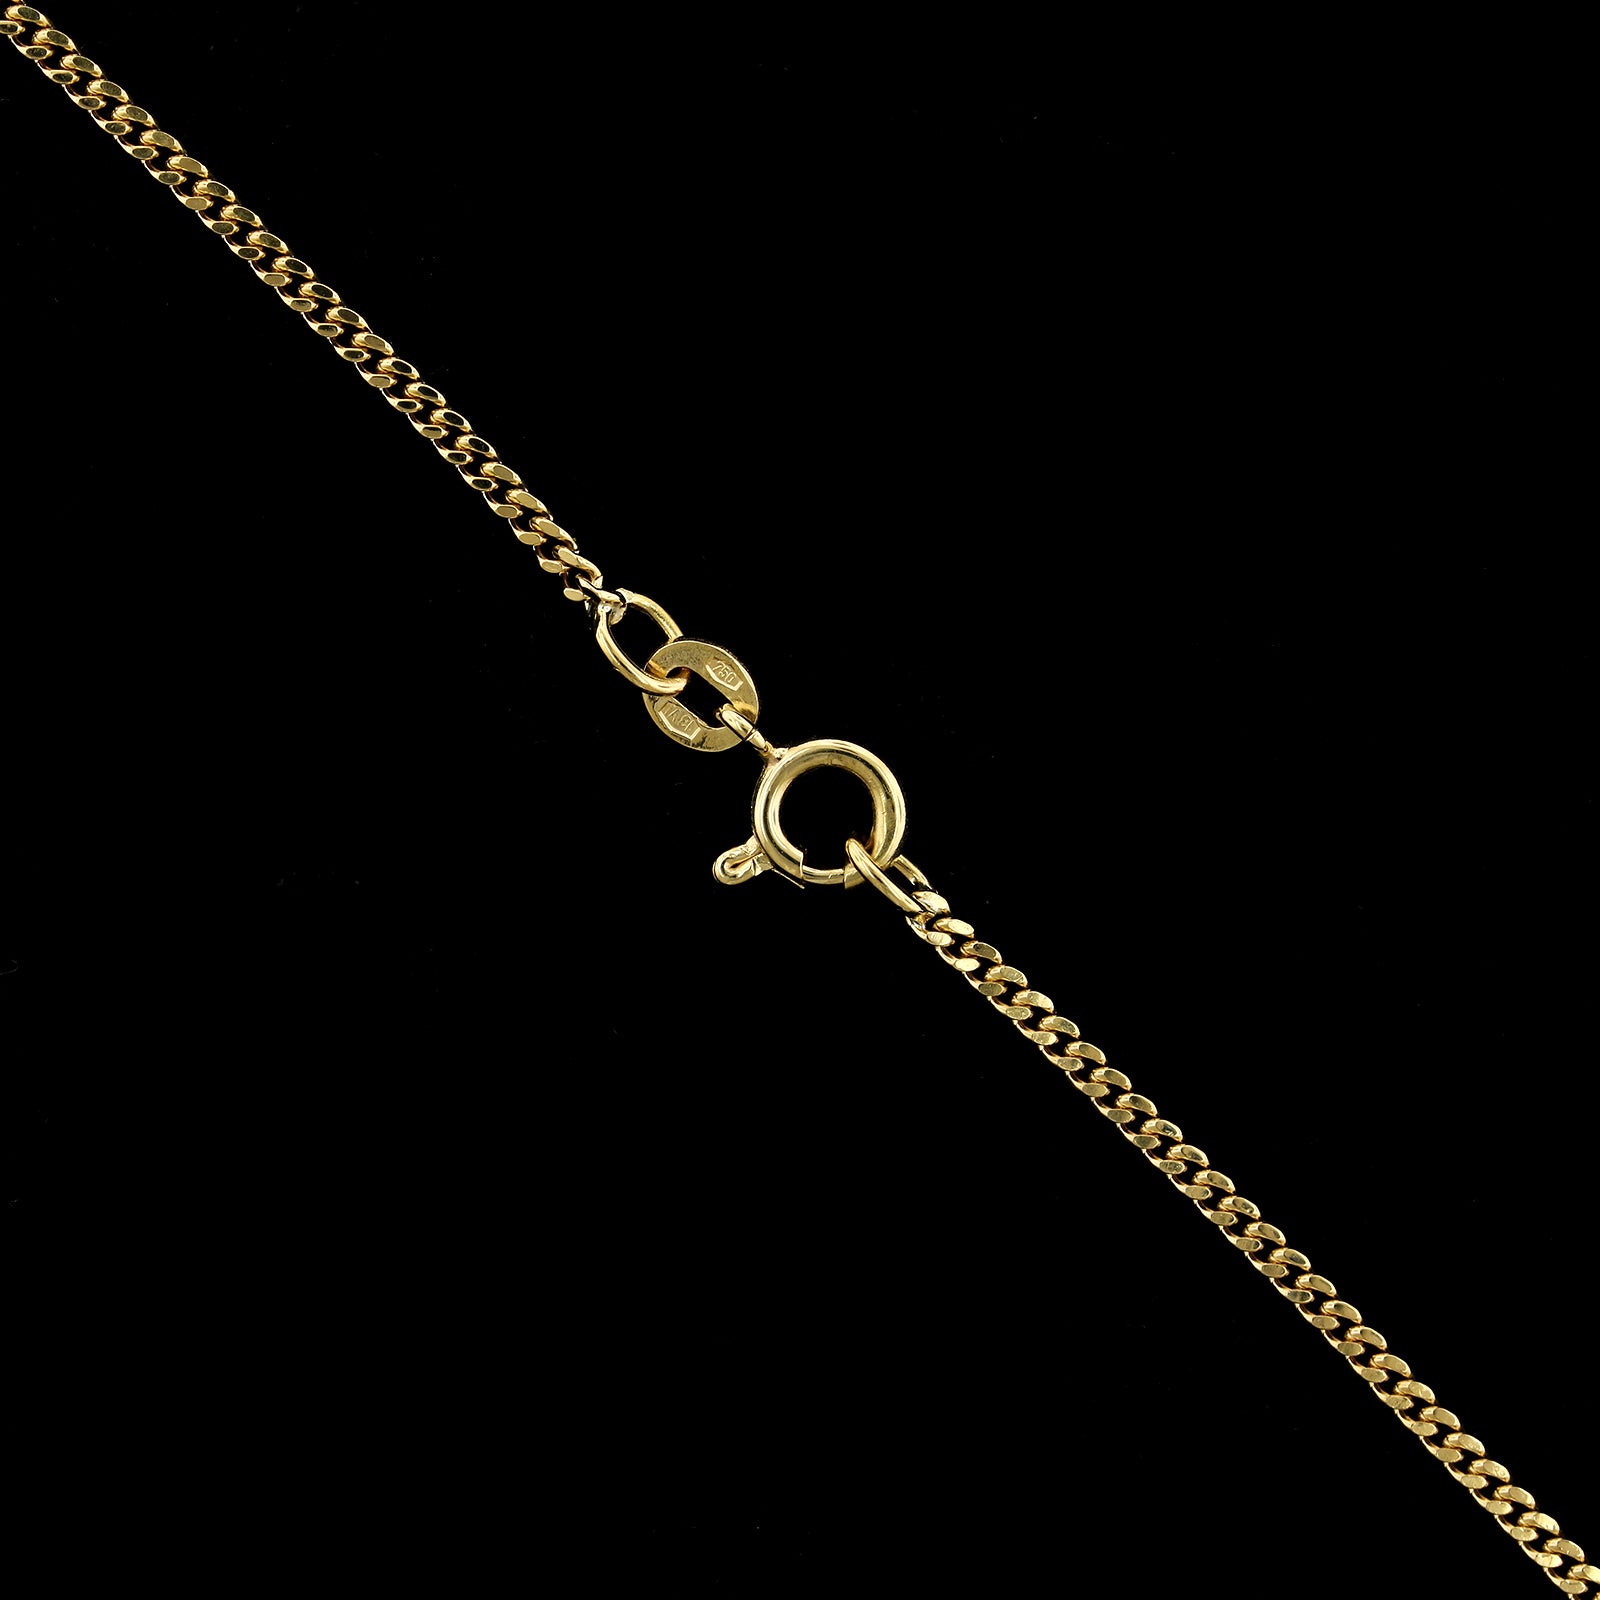 18K Yellow Gold Estate Curb Link Chain